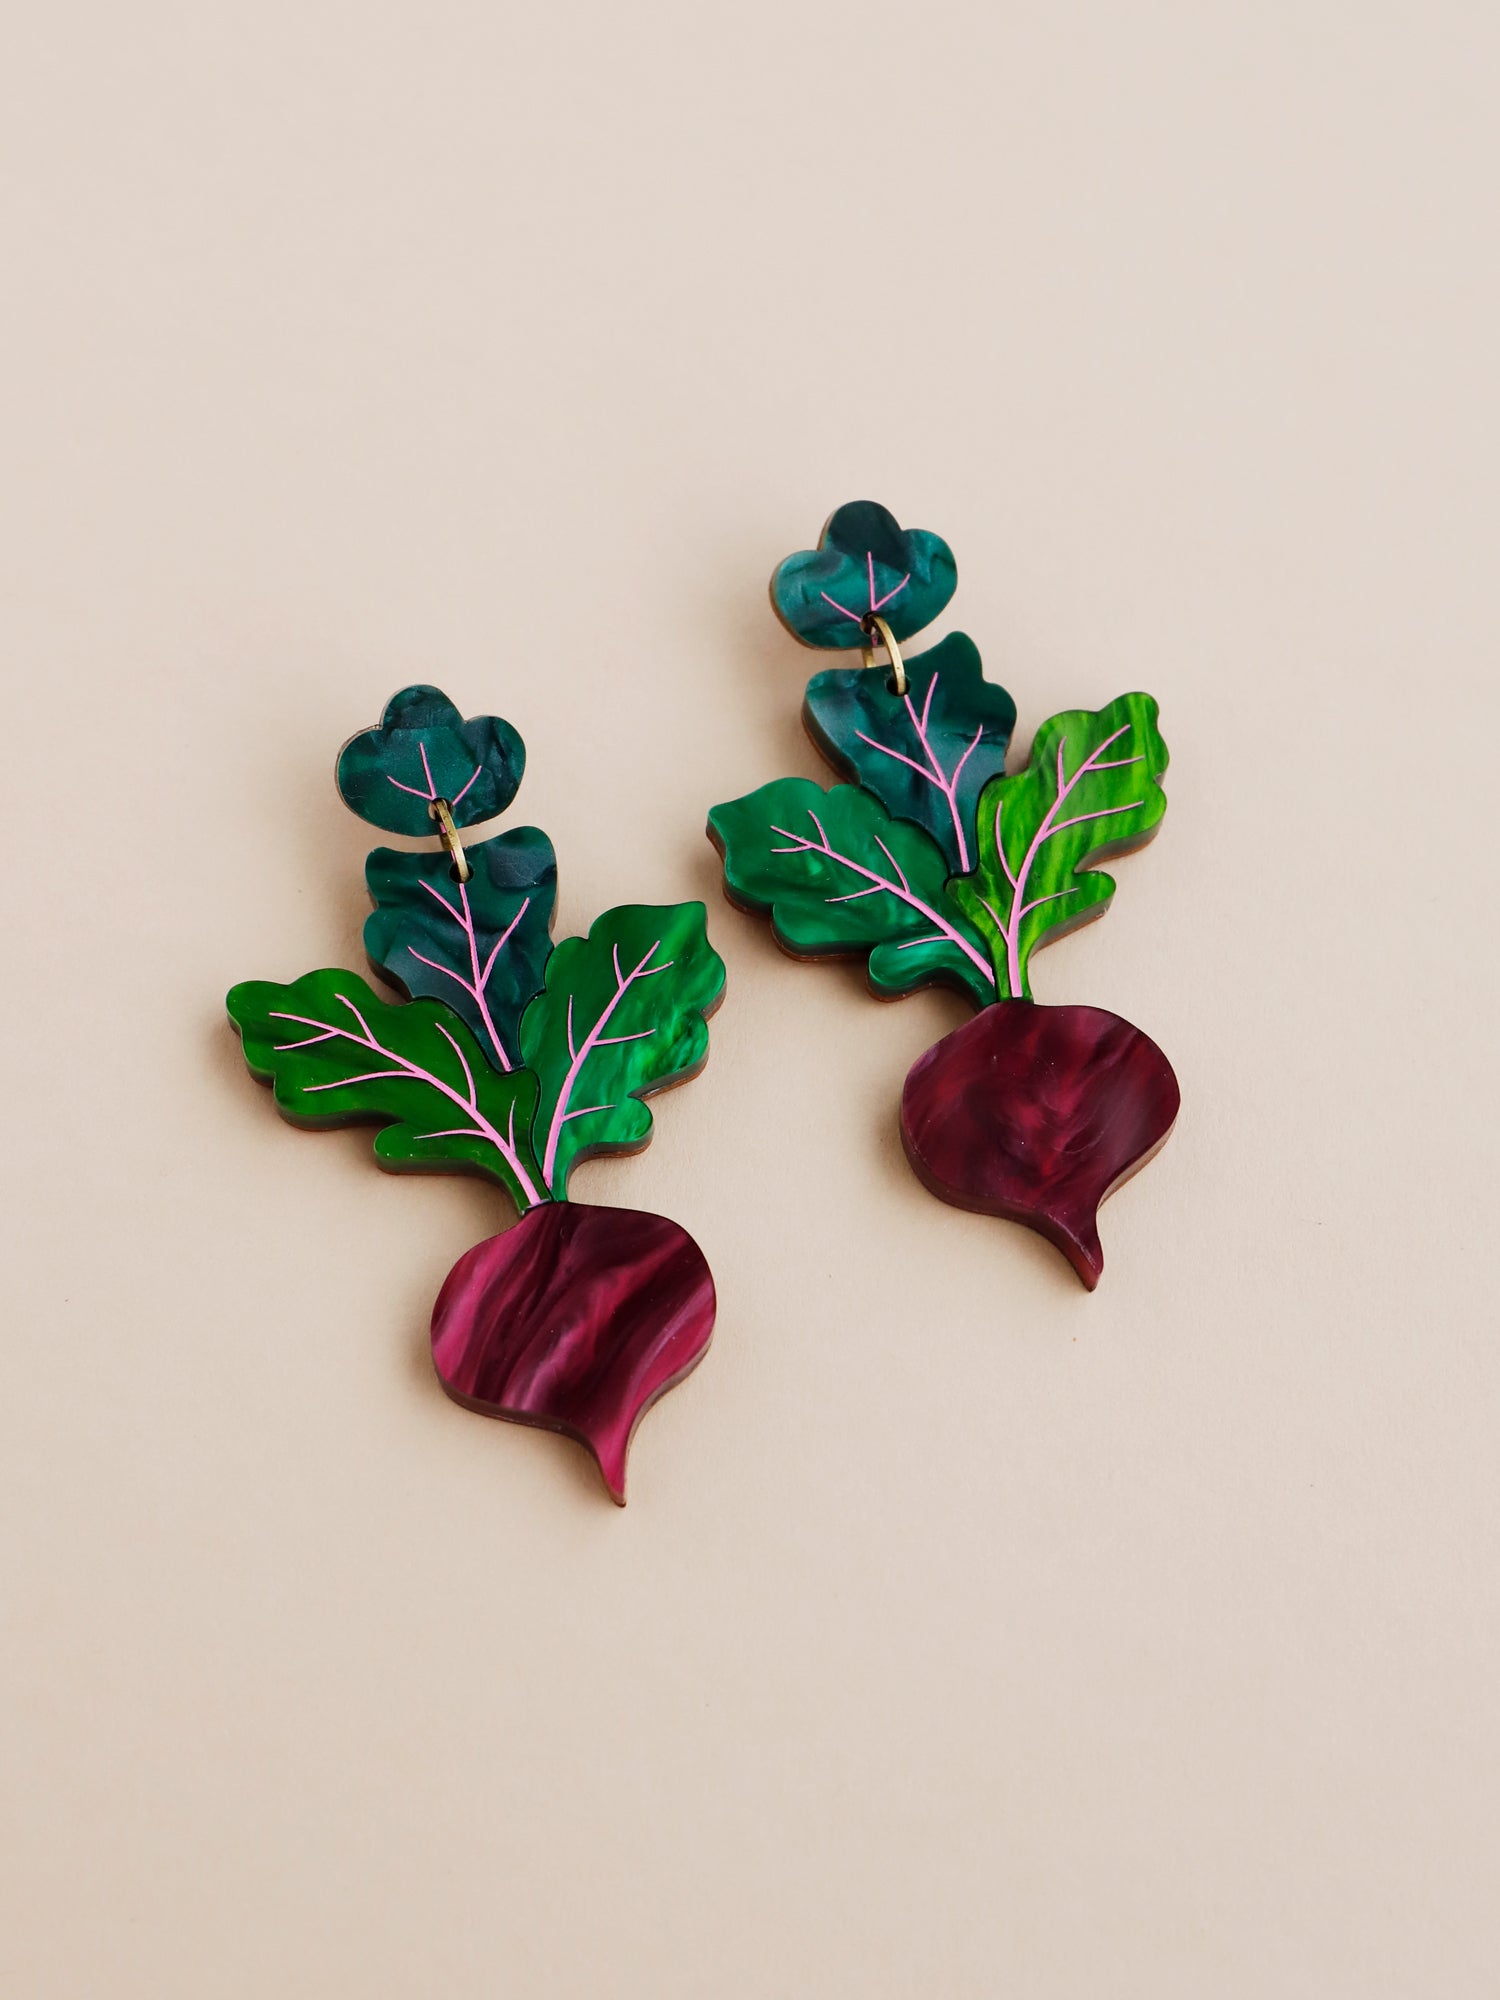 Purple and green hand-inked statement beetroot earrings. Handmade in London by Wolf & Moon.